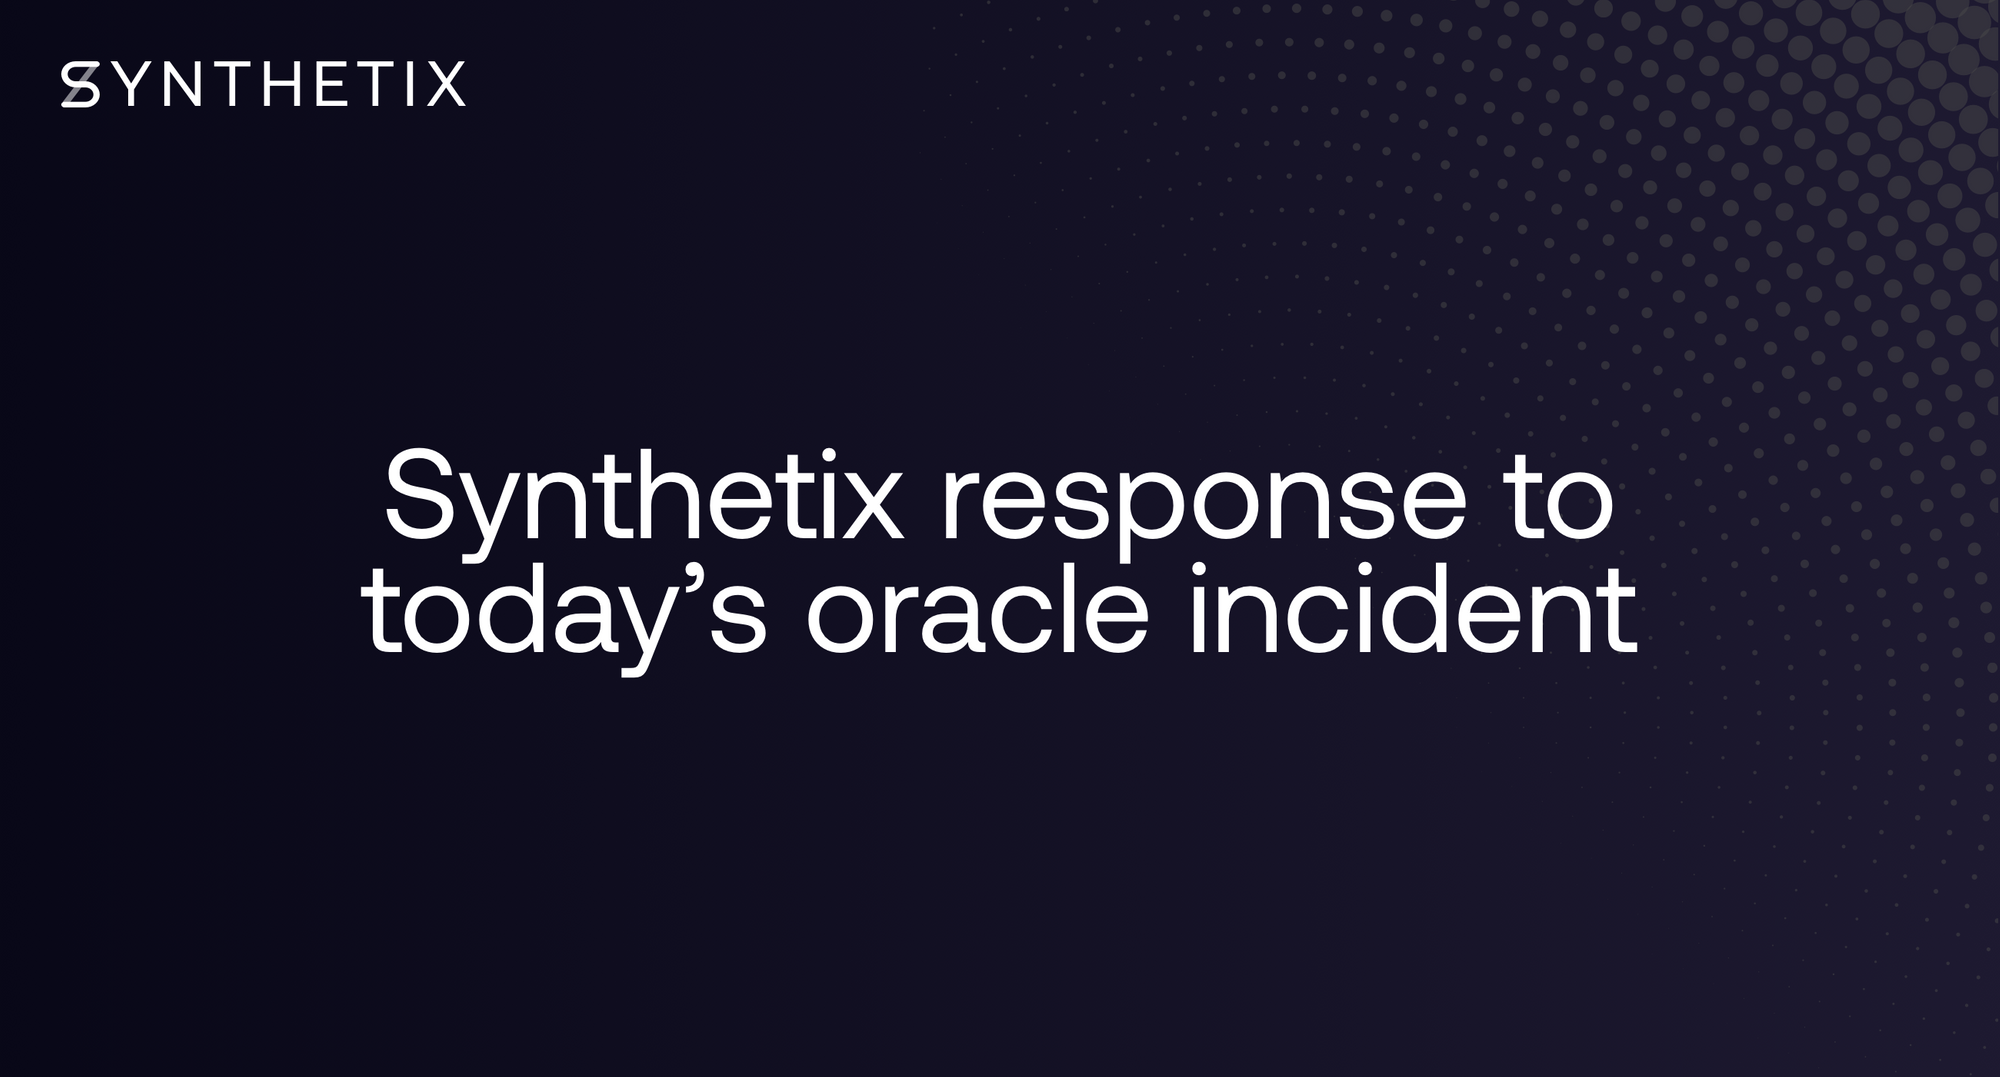 Synthetix Response to Oracle Incident